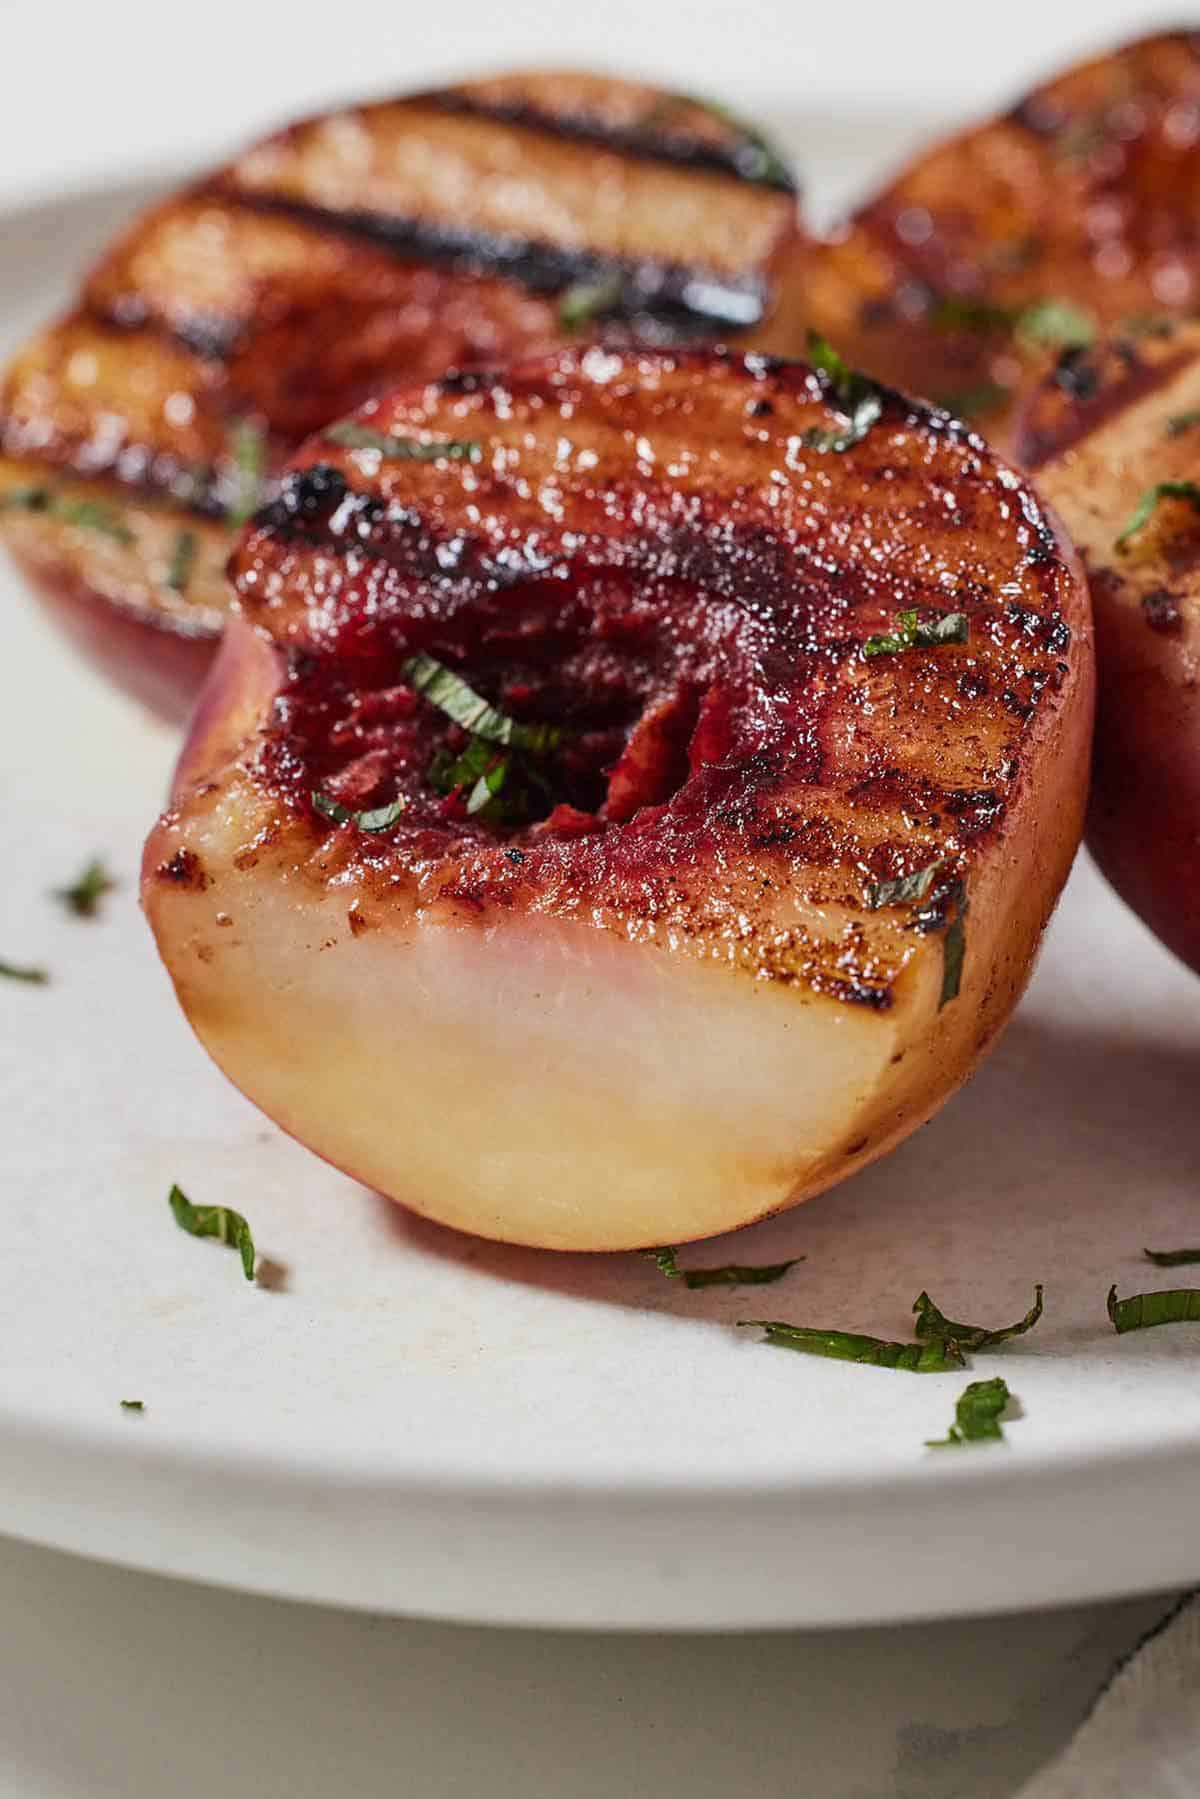 Close up of a grilled peach with a portion sliced off.